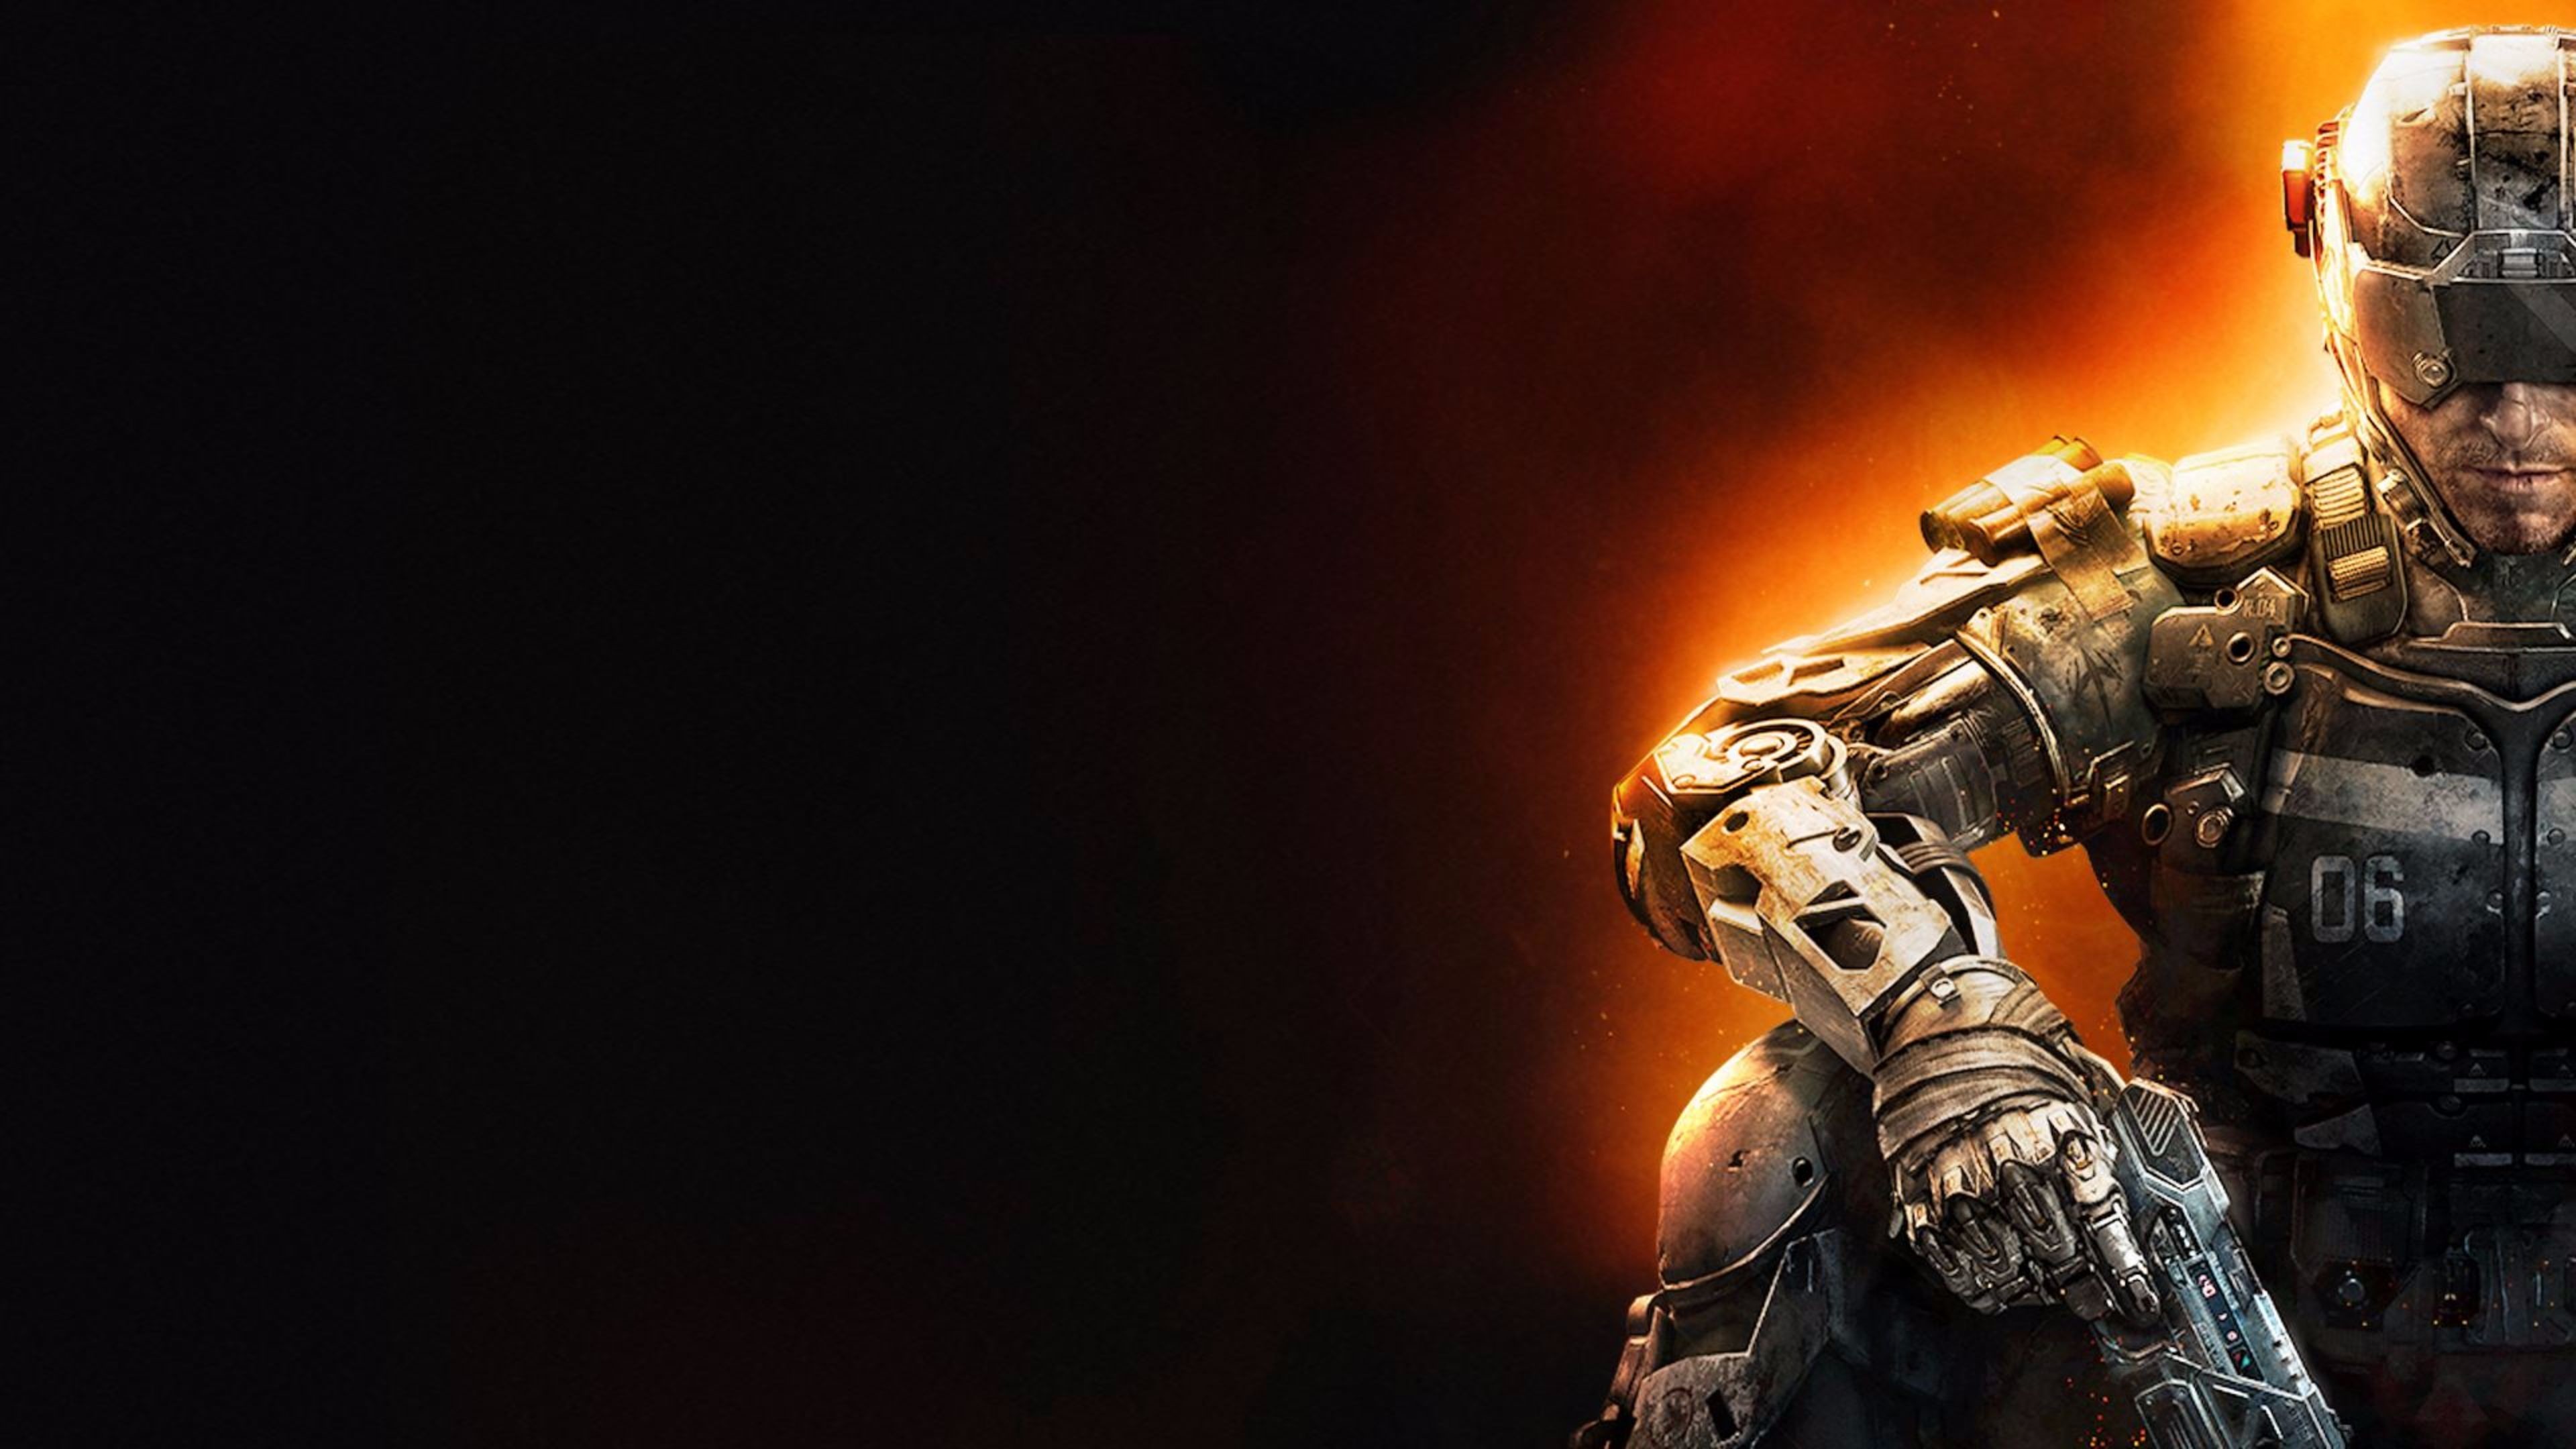 3840x2160 Download Free 2016 Call of Duty Black Ops 3 4K Wallpaper